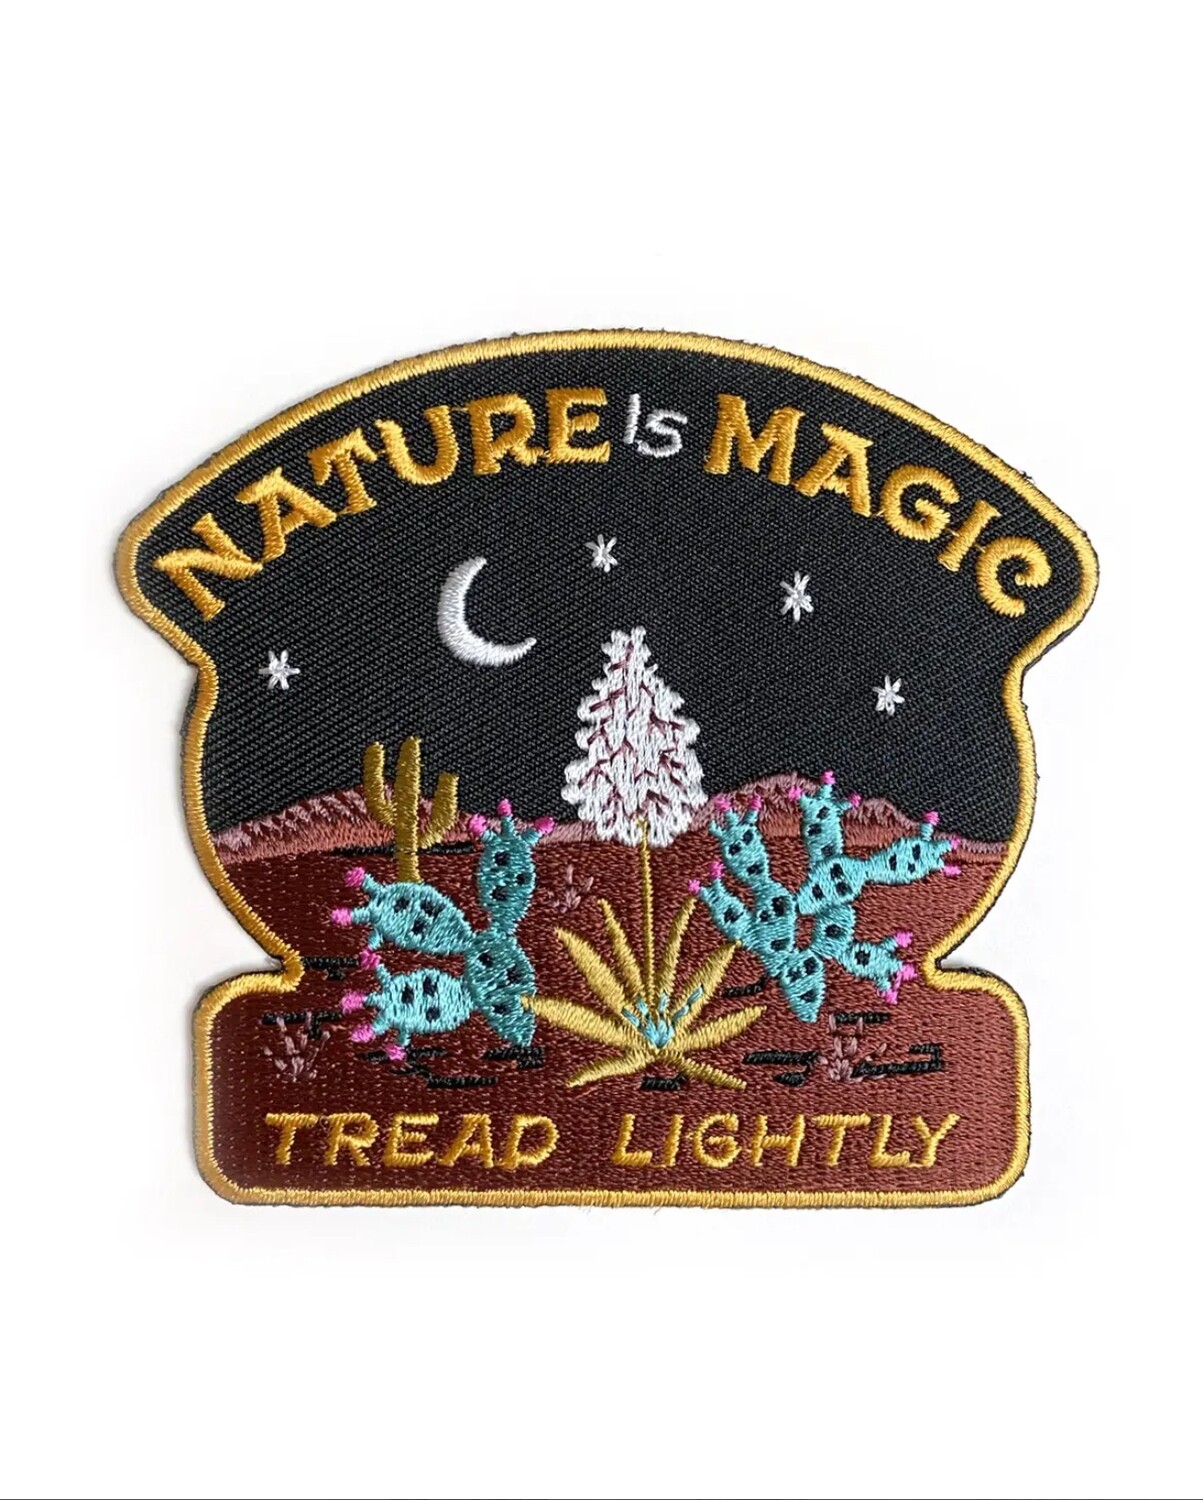 Nature Is Magic Embroidered Patch - AQPA27